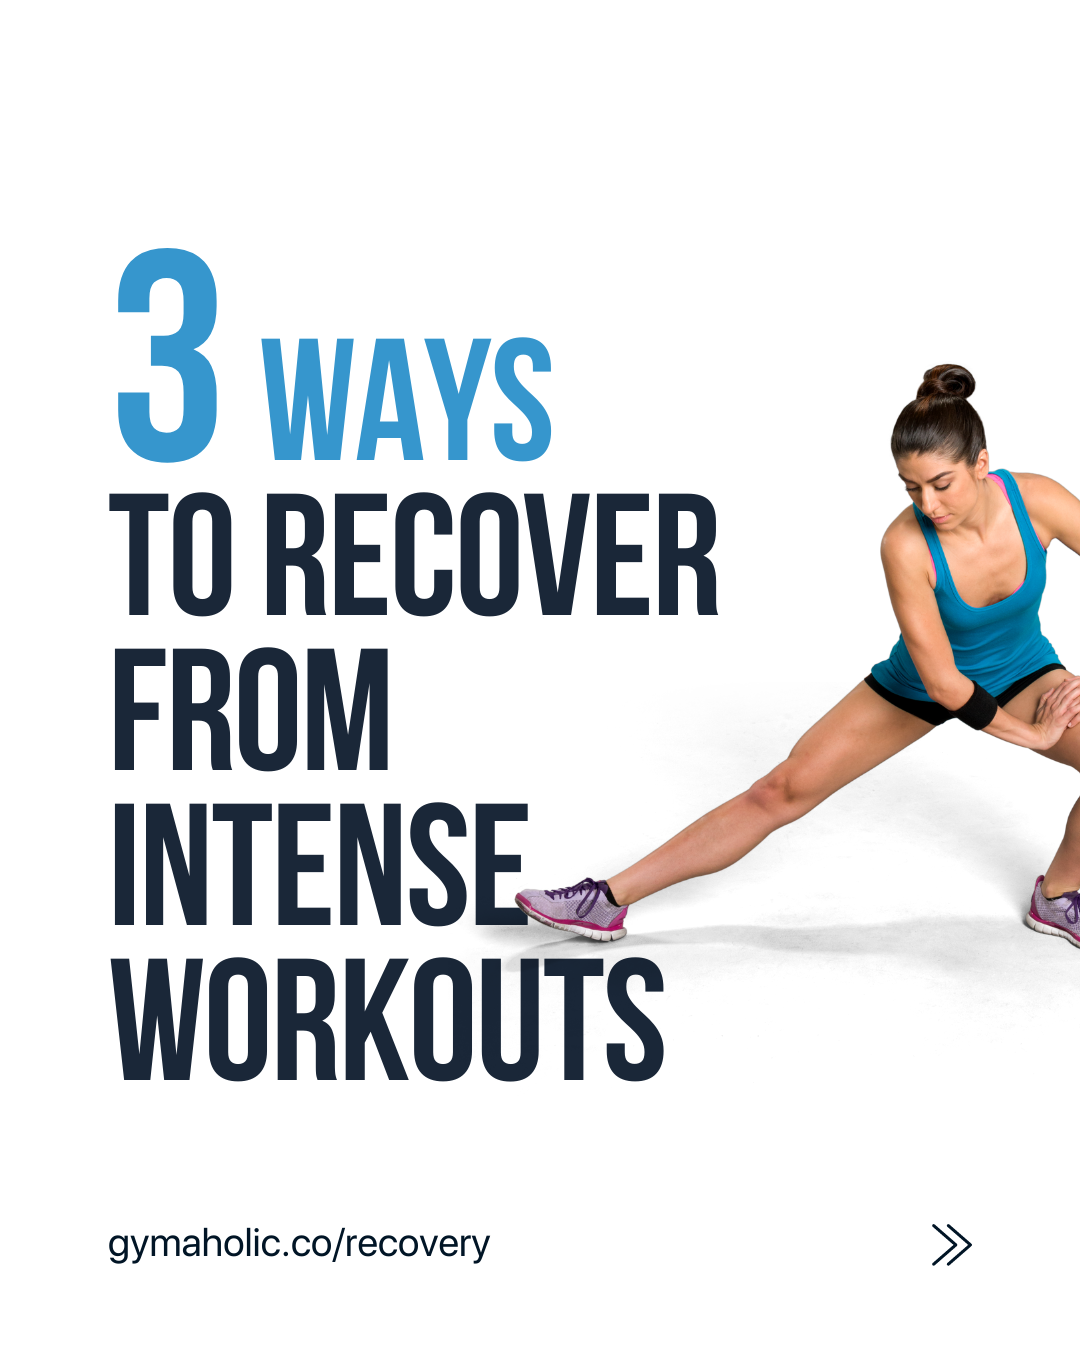 The effectiveness of your next workout will depend on how well you recovered